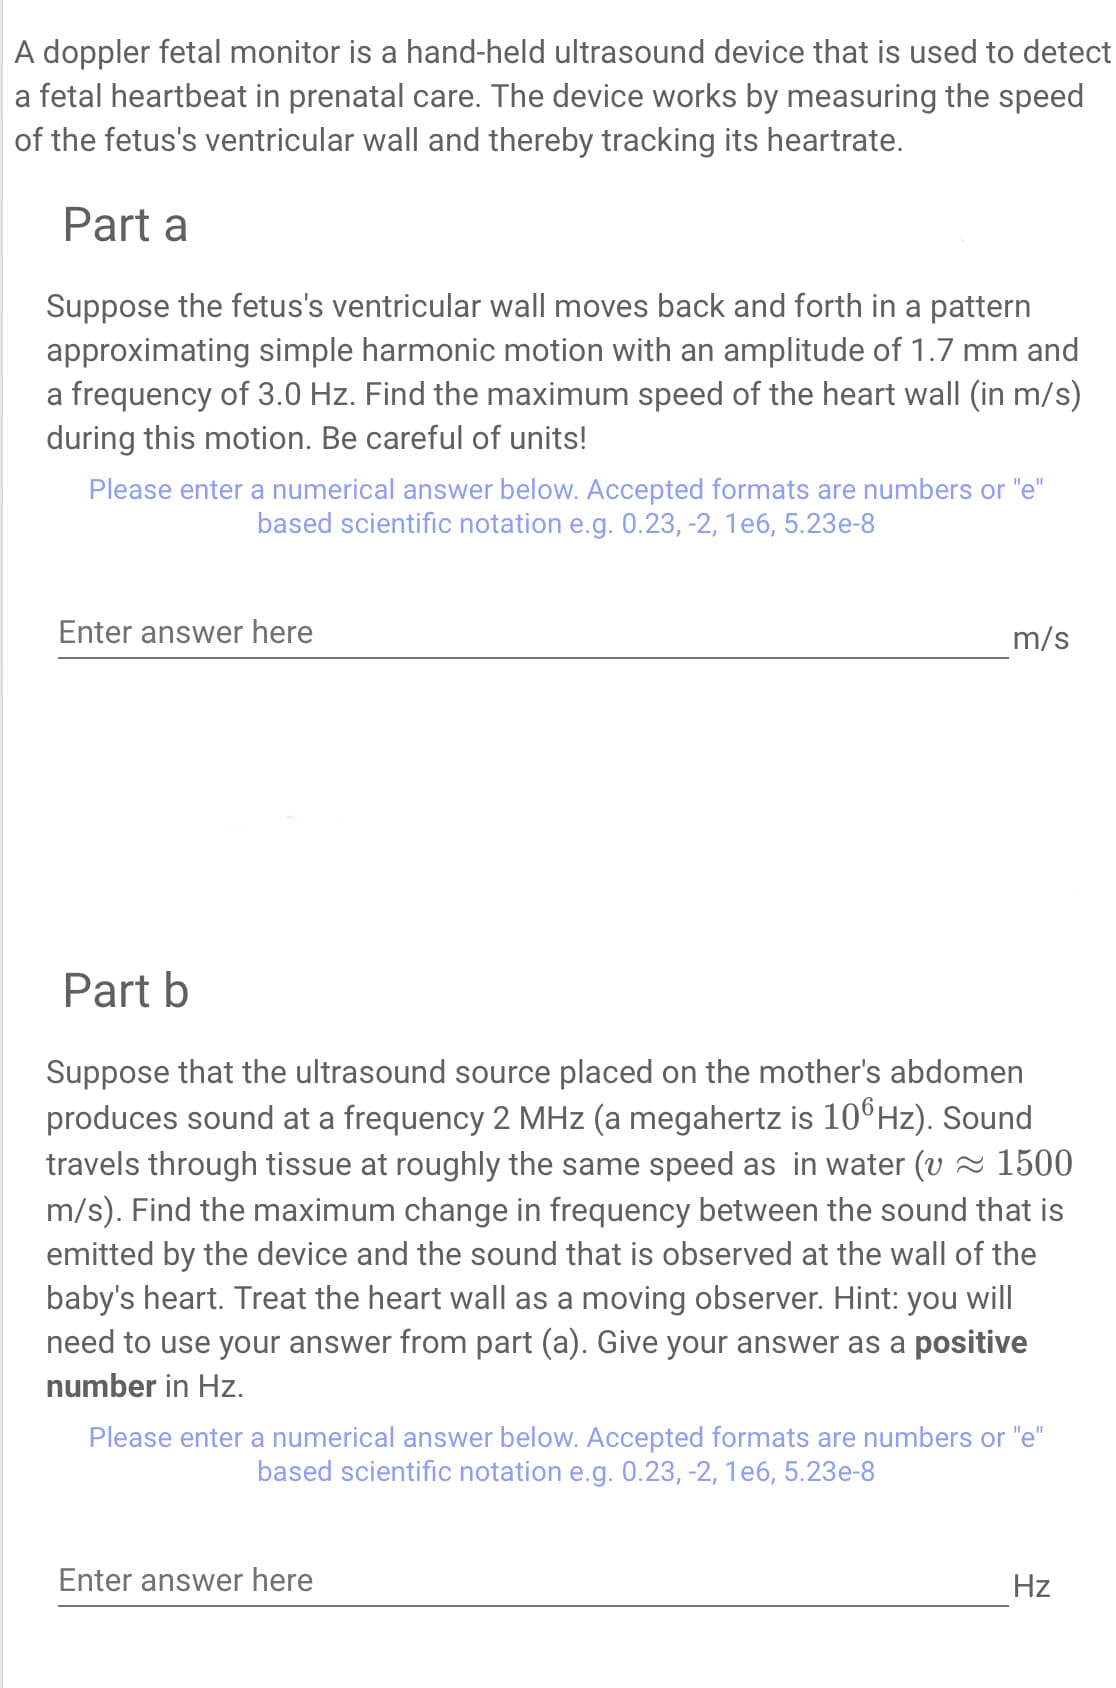 A doppler fetal monitor is a hand-held ultrasound device that is used to detect
a fetal heartbeat in prenatal care. The device works by measuring the speed
of the fetus's ventricular wall and thereby tracking its heartrate.
Part a
Suppose the fetus's ventricular wall moves back and forth in a pattern
approximating simple harmonic motion with an amplitude of 1.7 mm and
a frequency of 3.0 Hz. Find the maximum speed of the heart wall (in m/s)
during this motion. Be careful of units!
Please enter a numerical answer below. Accepted formats are numbers or "e"
based scientific notation e.g. 0.23, -2, 1e6, 5.23e-8
Enter answer here
m/s
Part b
Suppose that the ultrasound source placed on the mother's abdomen
produces sound at a frequency 2 MHz (a megahertz is 106Hz). Sound
travels through tissue at roughly the same speed as in water (v ≈ 1500
m/s). Find the maximum change in frequency between the sound that is
emitted by the device and the sound that is observed at the wall of the
baby's heart. Treat the heart wall as a moving observer. Hint: you will
need to use your answer from part (a). Give your answer as a positive
number in Hz.
Please enter a numerical answer below. Accepted formats are numbers or "e"
based scientific notation e.g. 0.23, -2, 1e6, 5.23e-8
Enter answer here
Hz